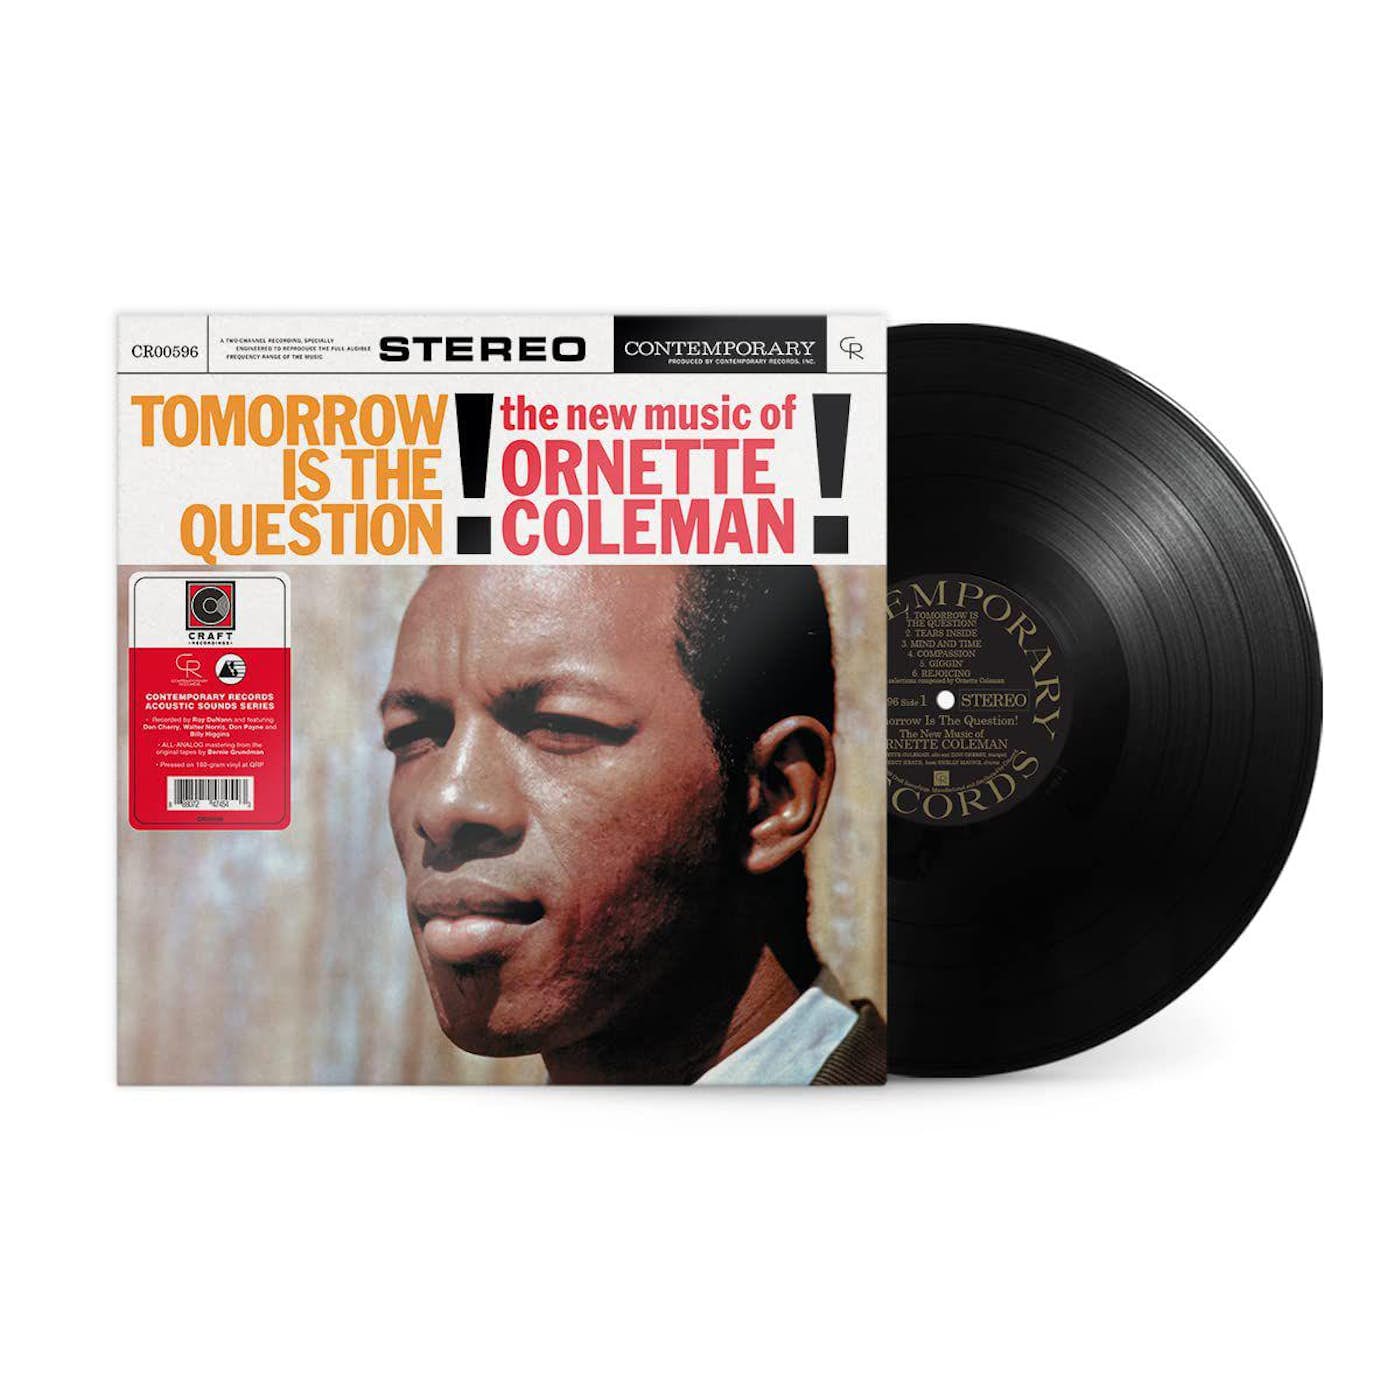 Ornette Coleman - Tomorrow Is The Question! (Contemporary Records Acoustic Sounds Series) [LP]